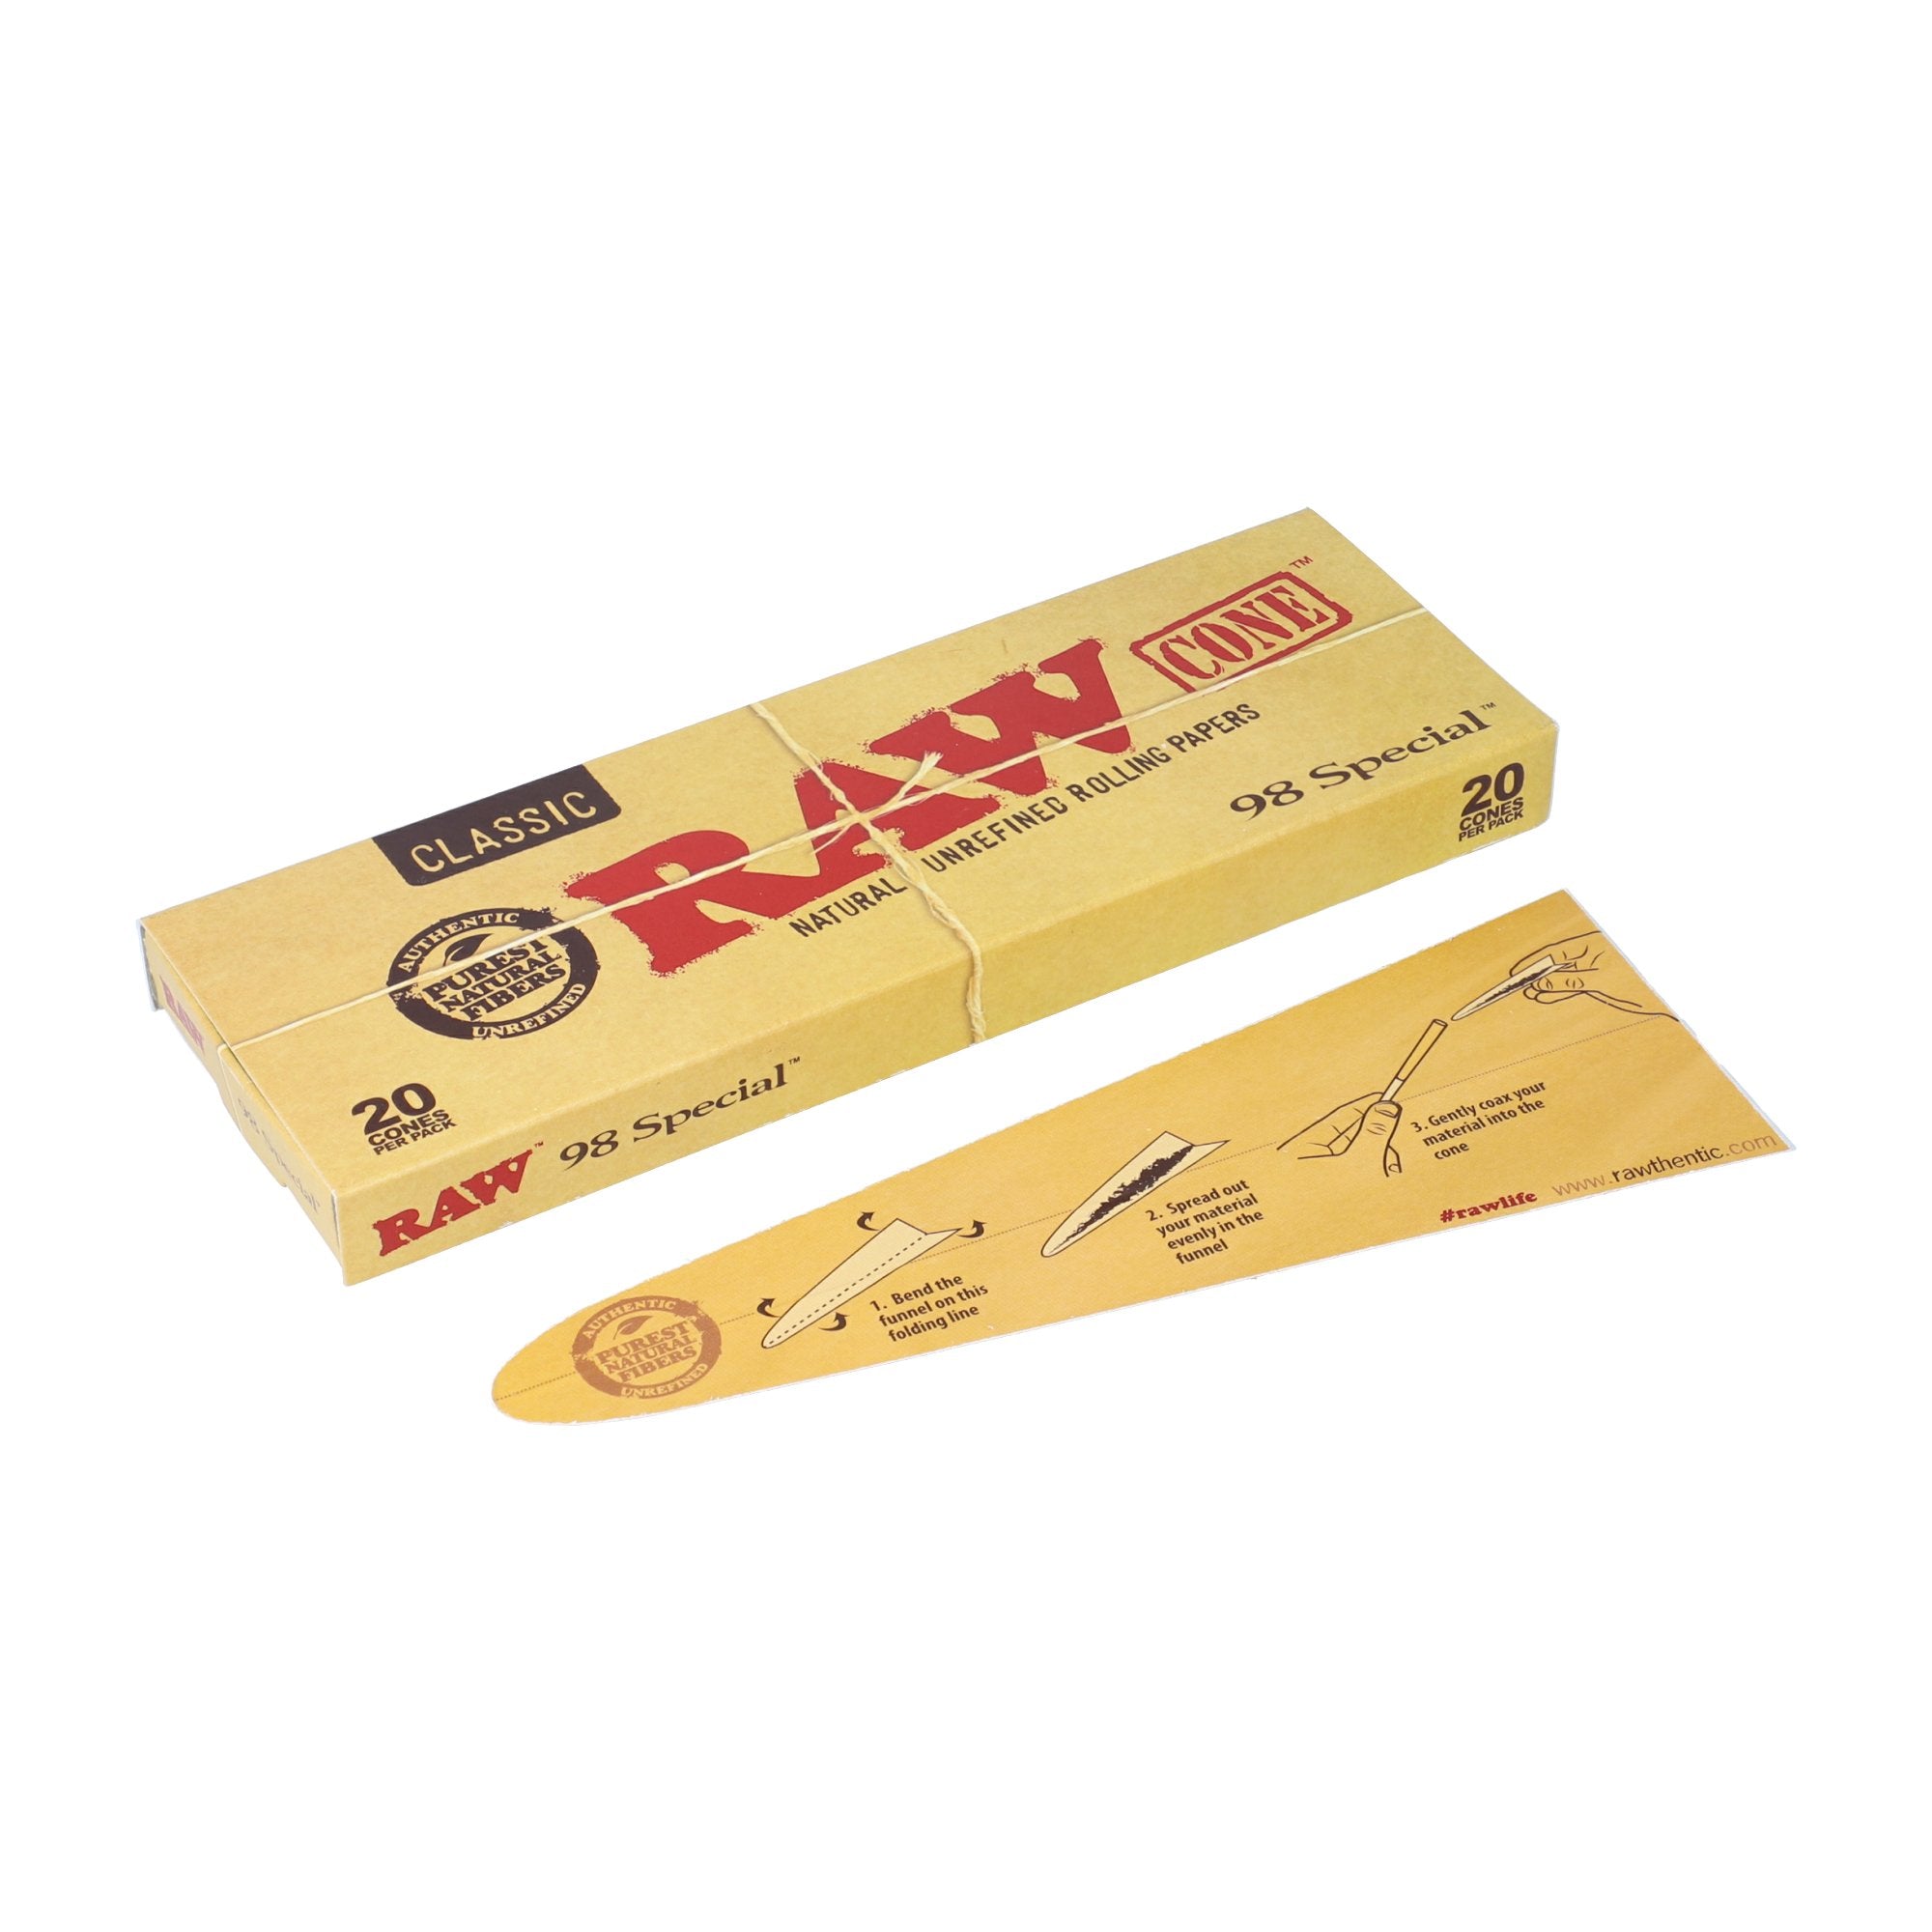 RAW Classic 98 special Size Cones (200PK)+smell proof tube+glass cone tip